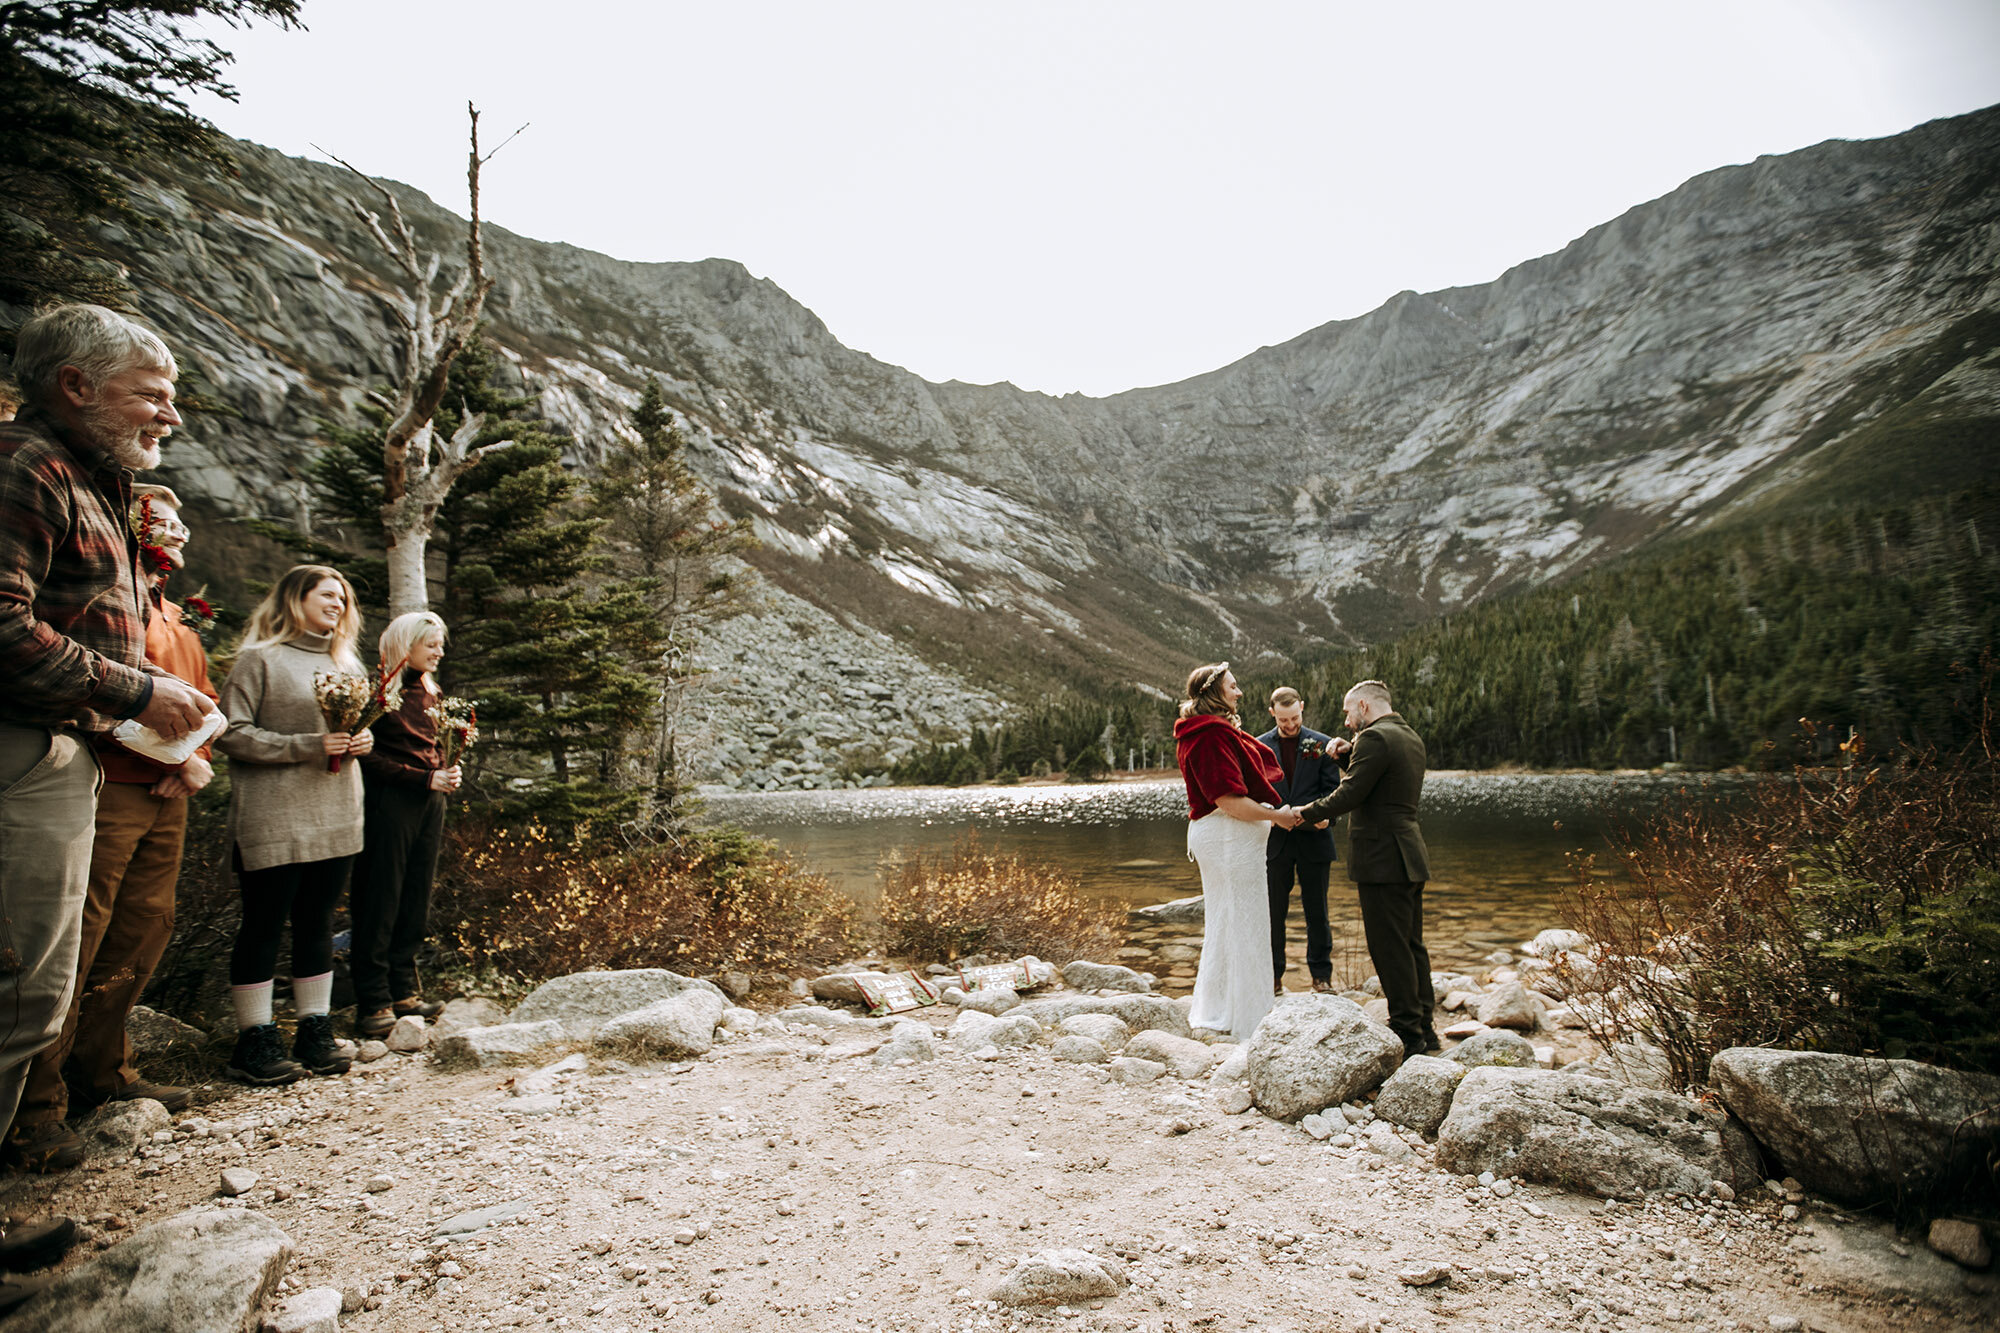  Dani and Nate chose to skip the large wedding and ended up hiking into Chimney Pond with very close family and friends.  